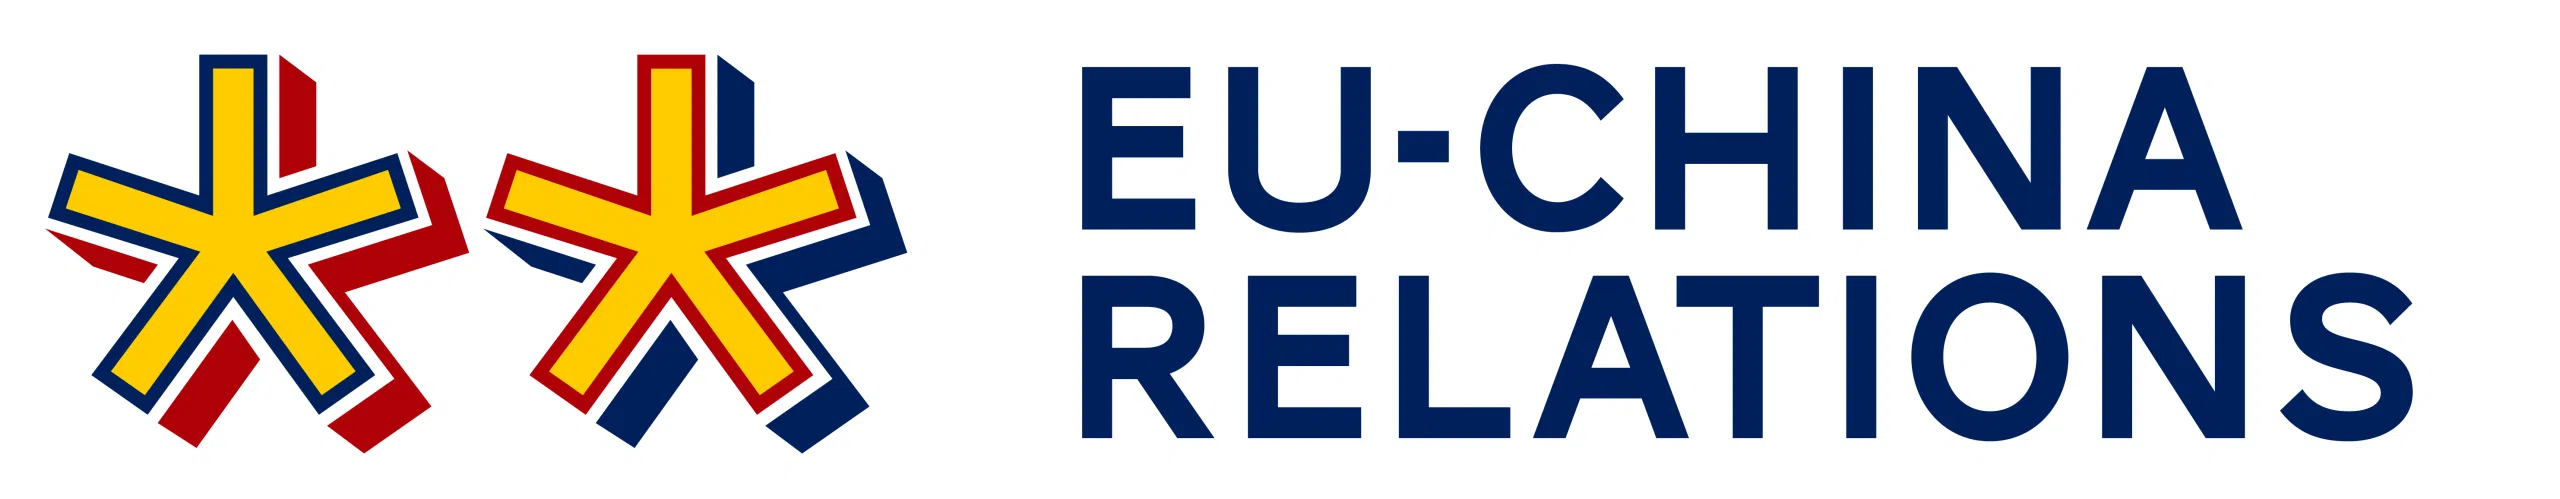 EU-China CRN from UACES (University Association for Contemporary European Studies